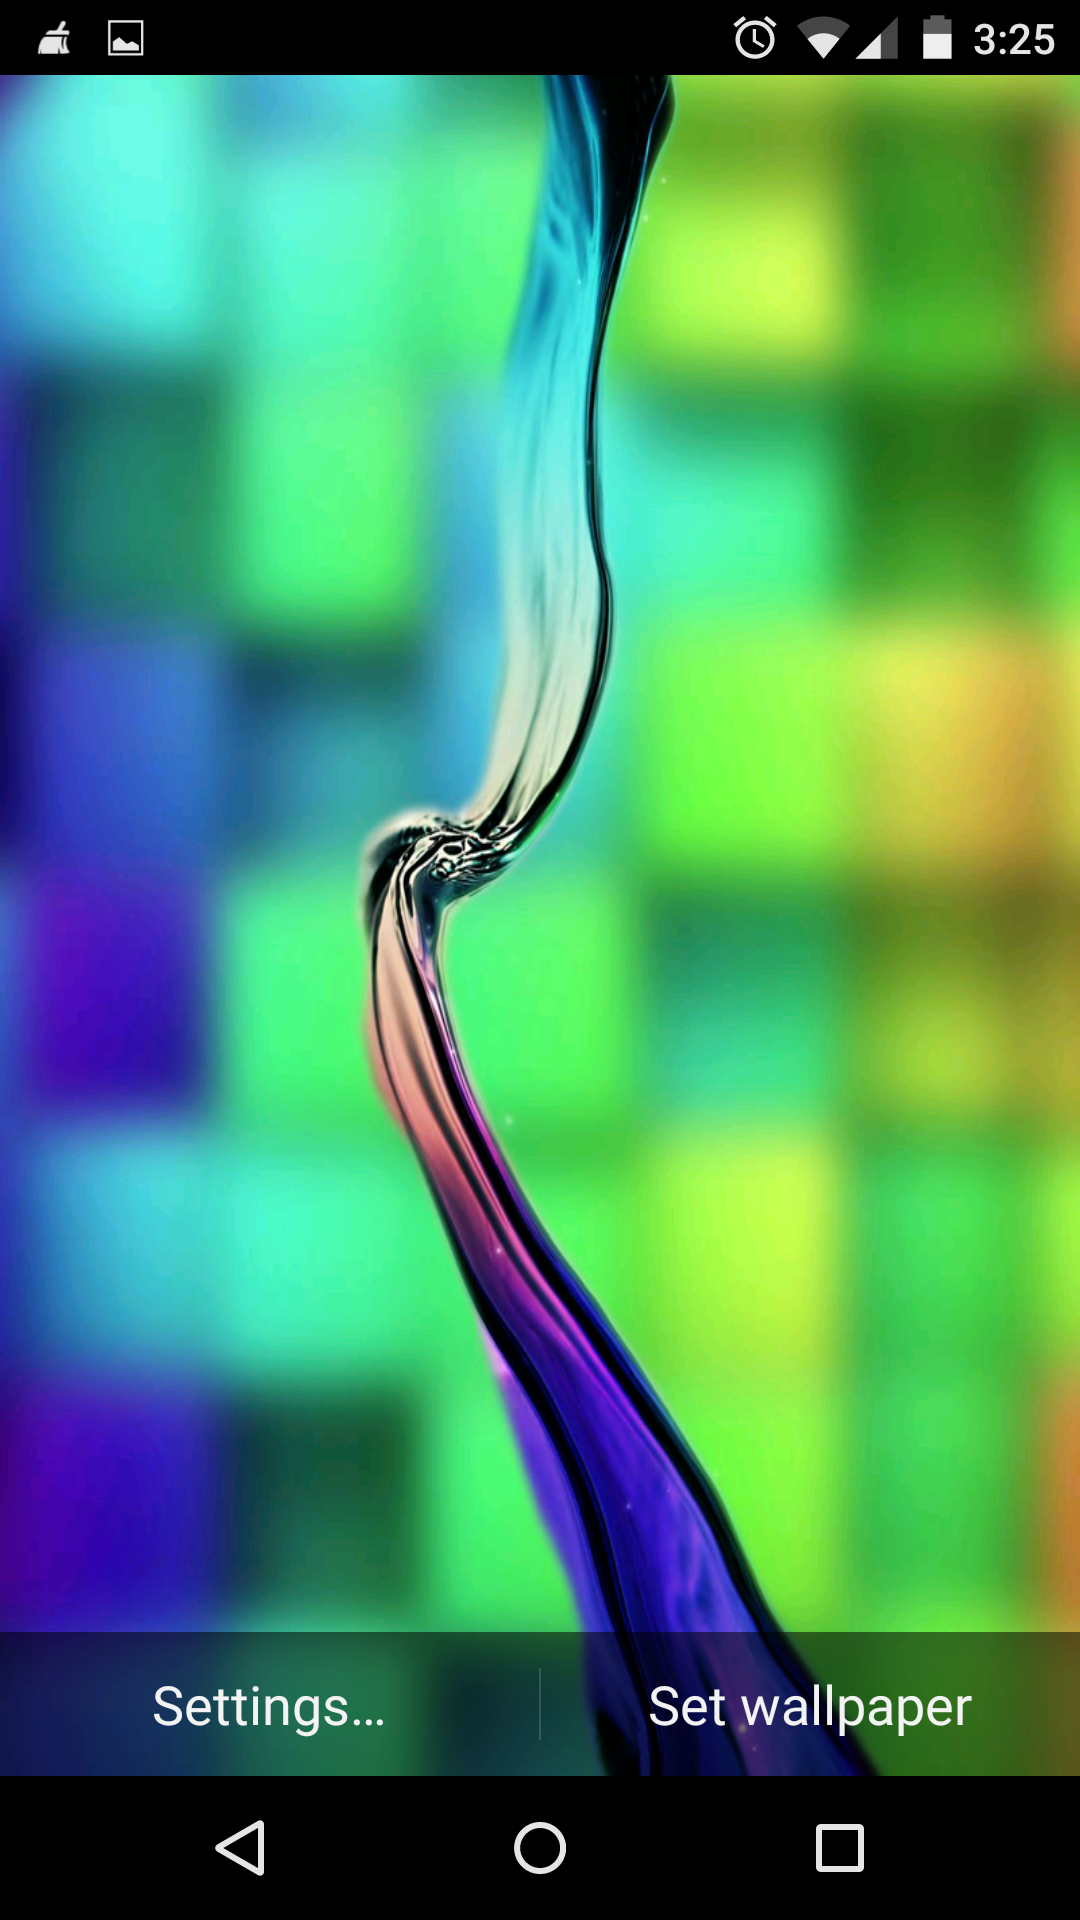 The Samsung Galaxy S6 Released With Several Live Wallpaper